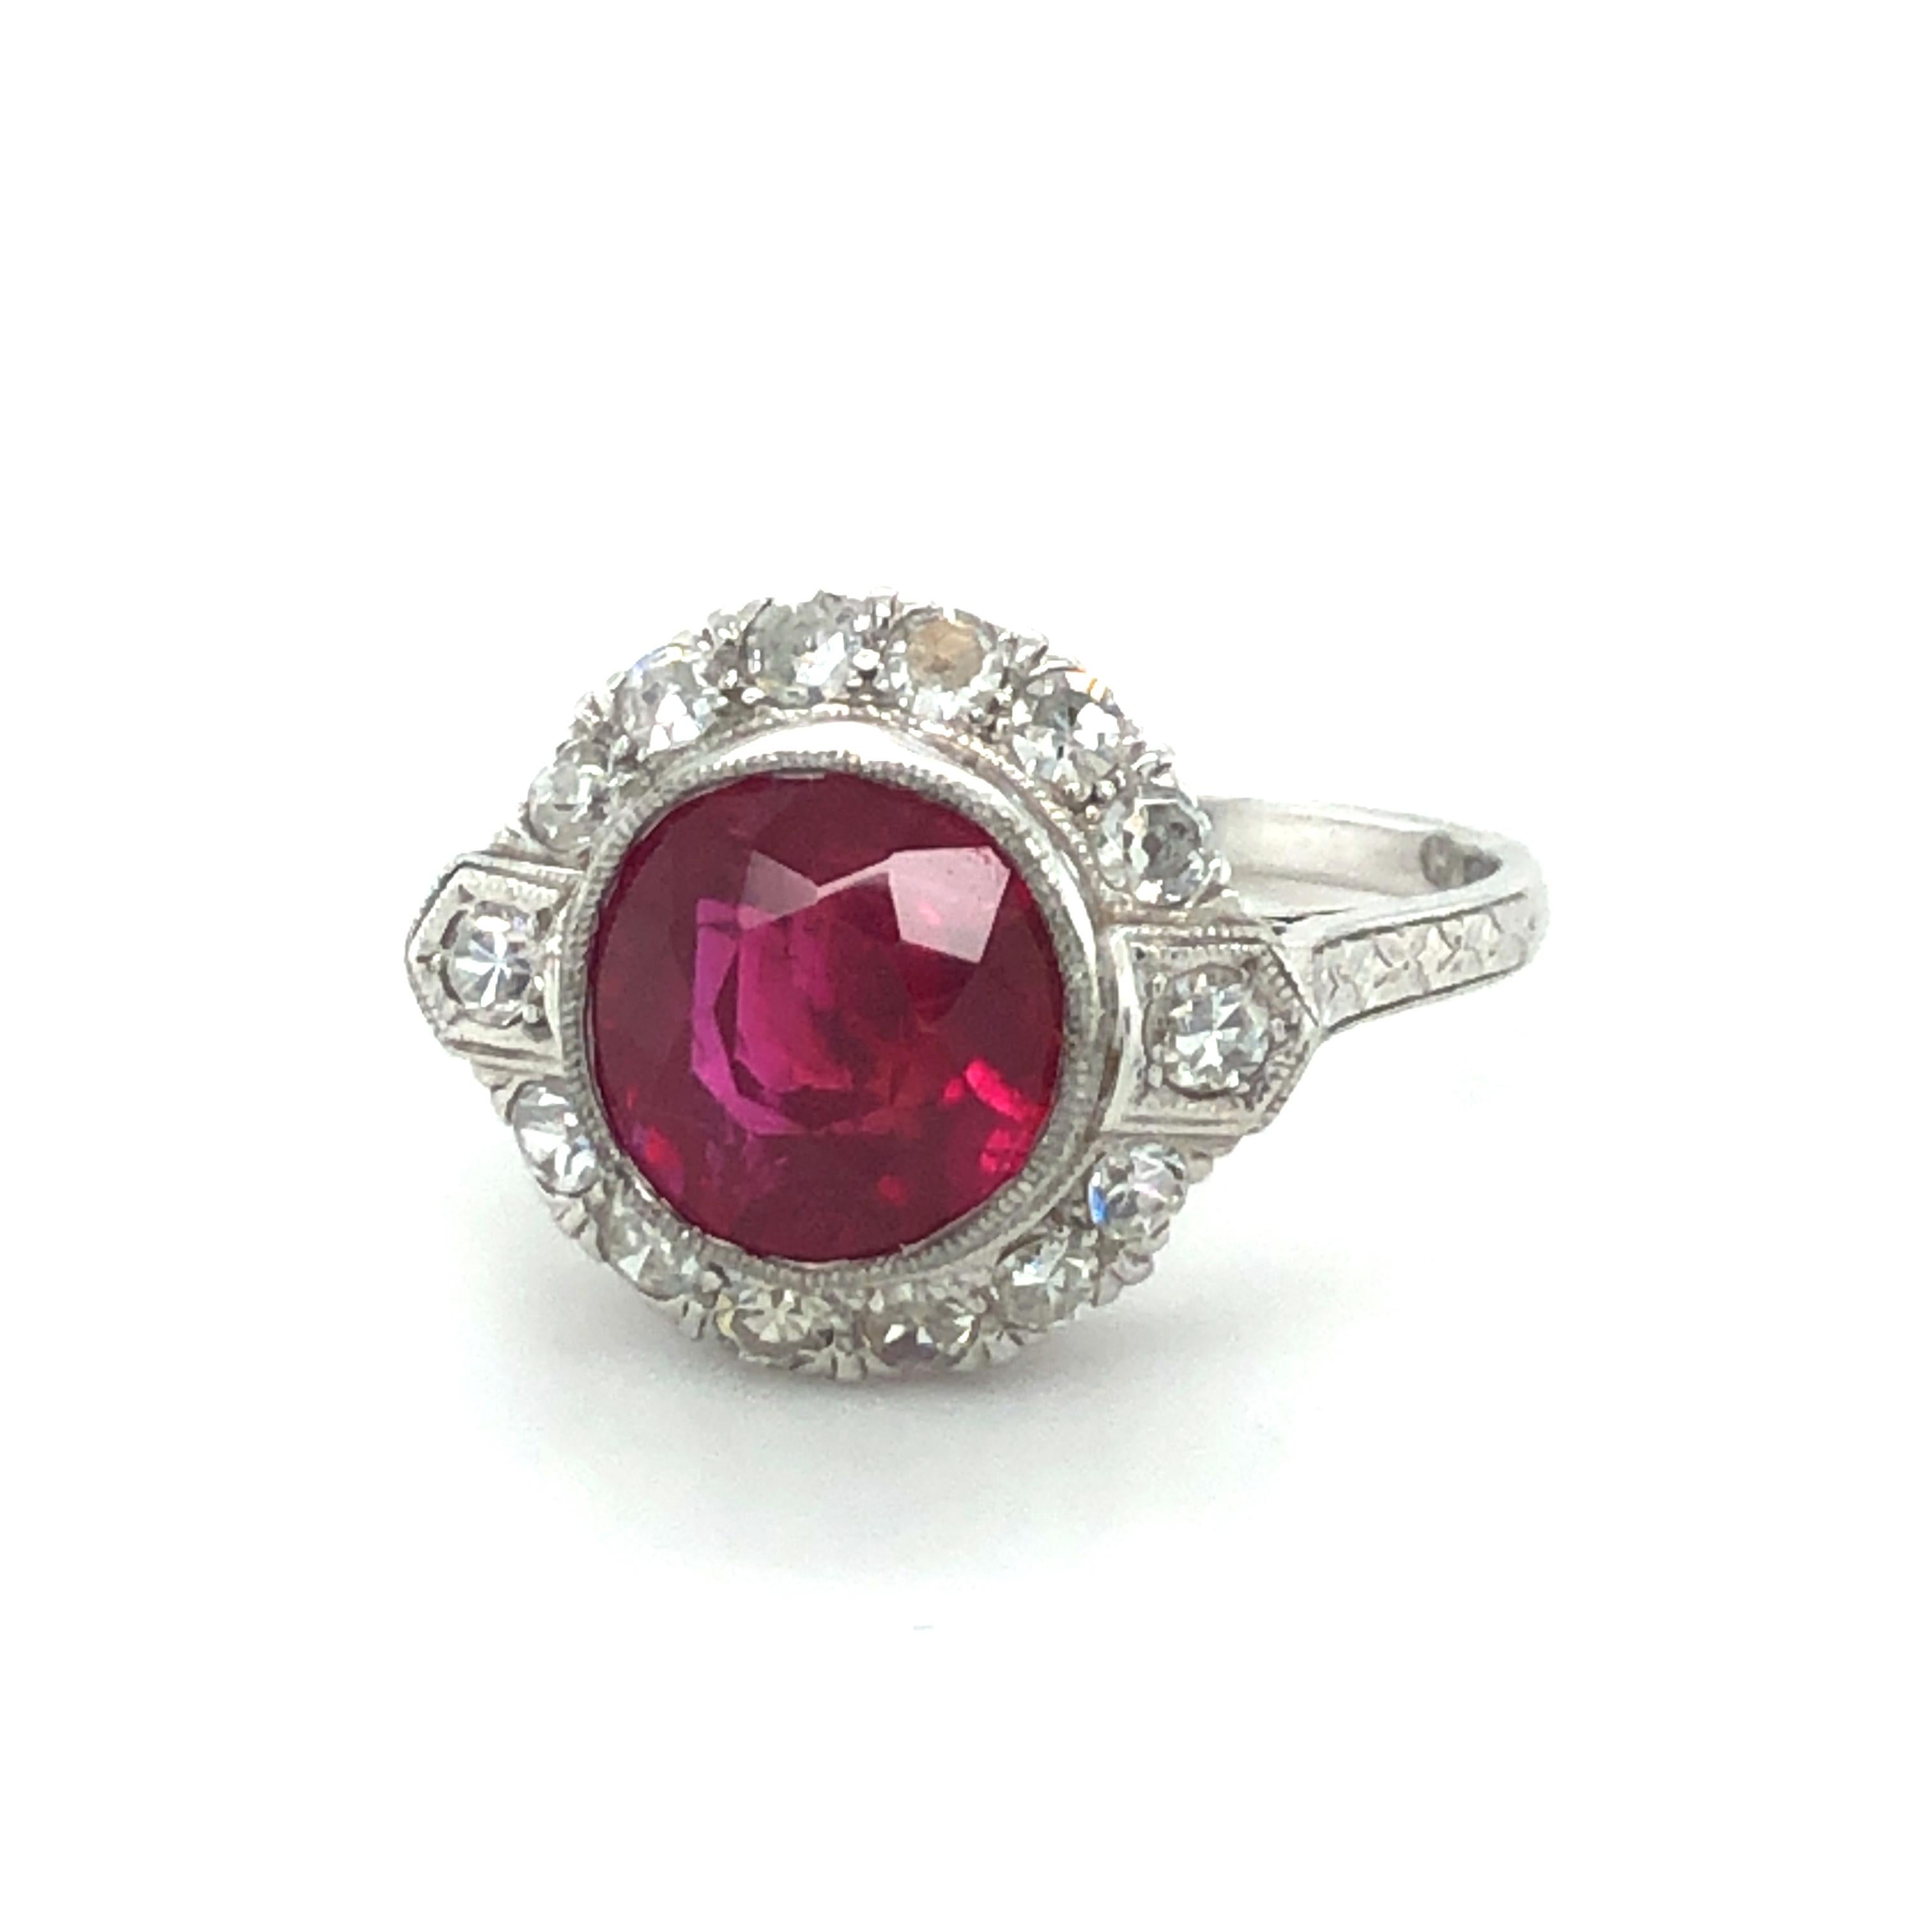 Cushion Cut Fabulous Art Deco Ring with Burmese Ruby and Diamonds in Platinum 950